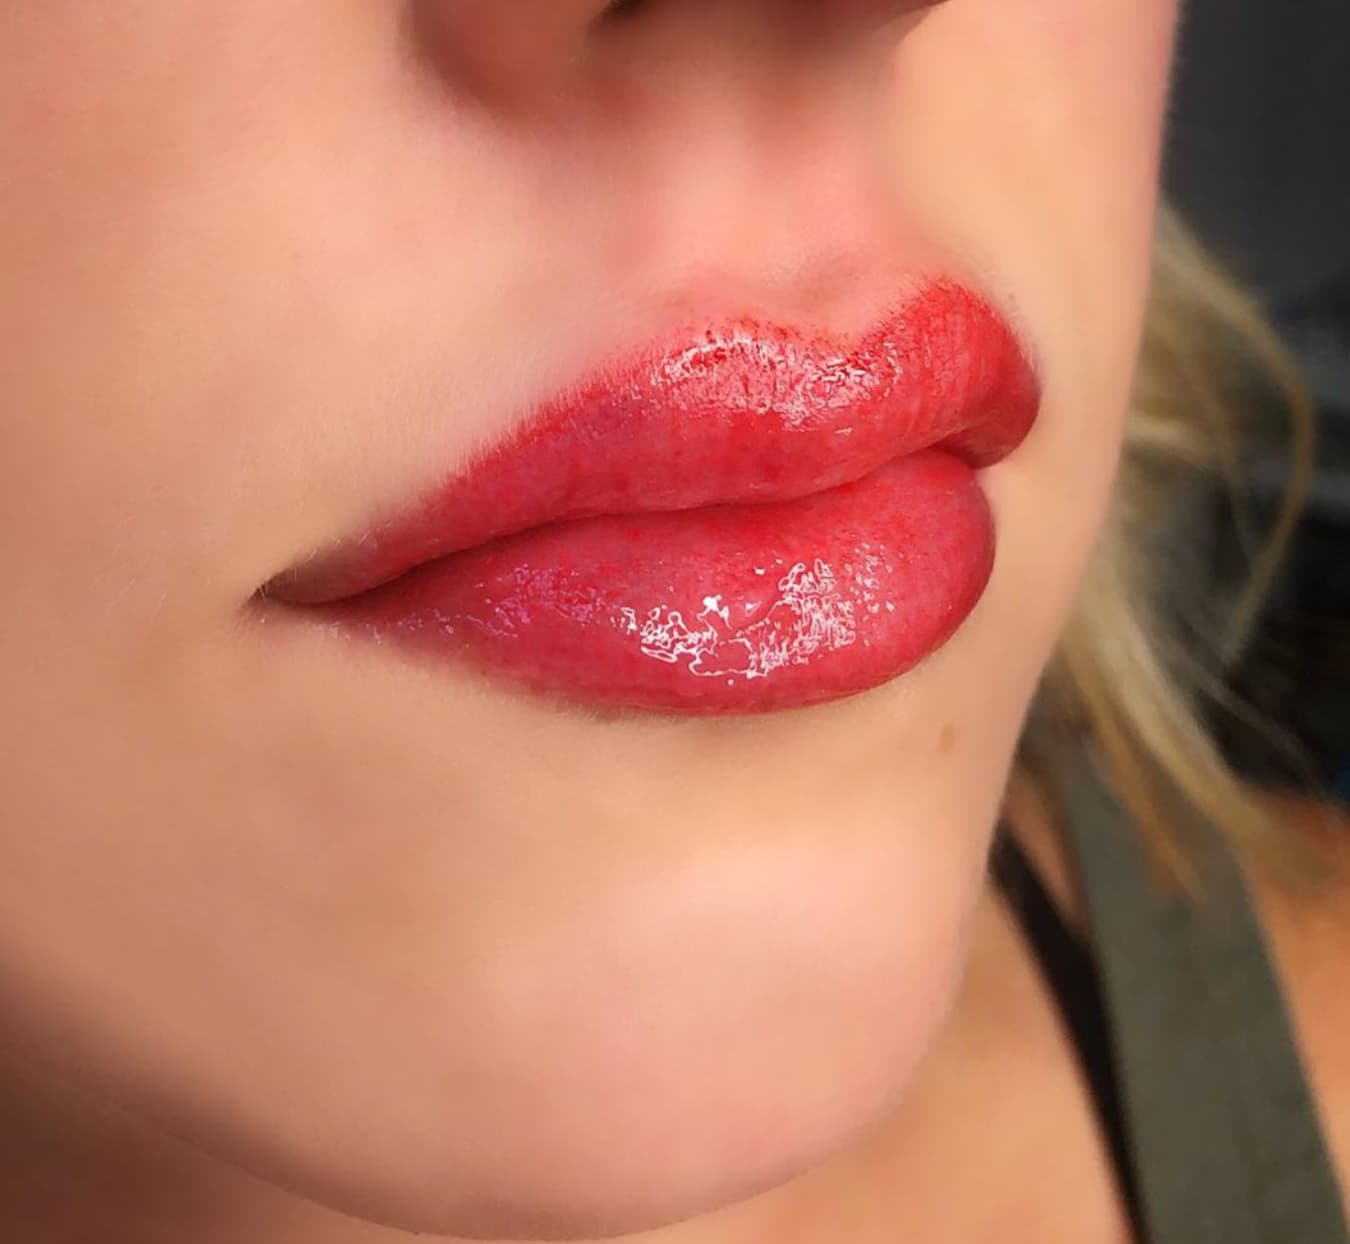 After picture of lip blush tattoo